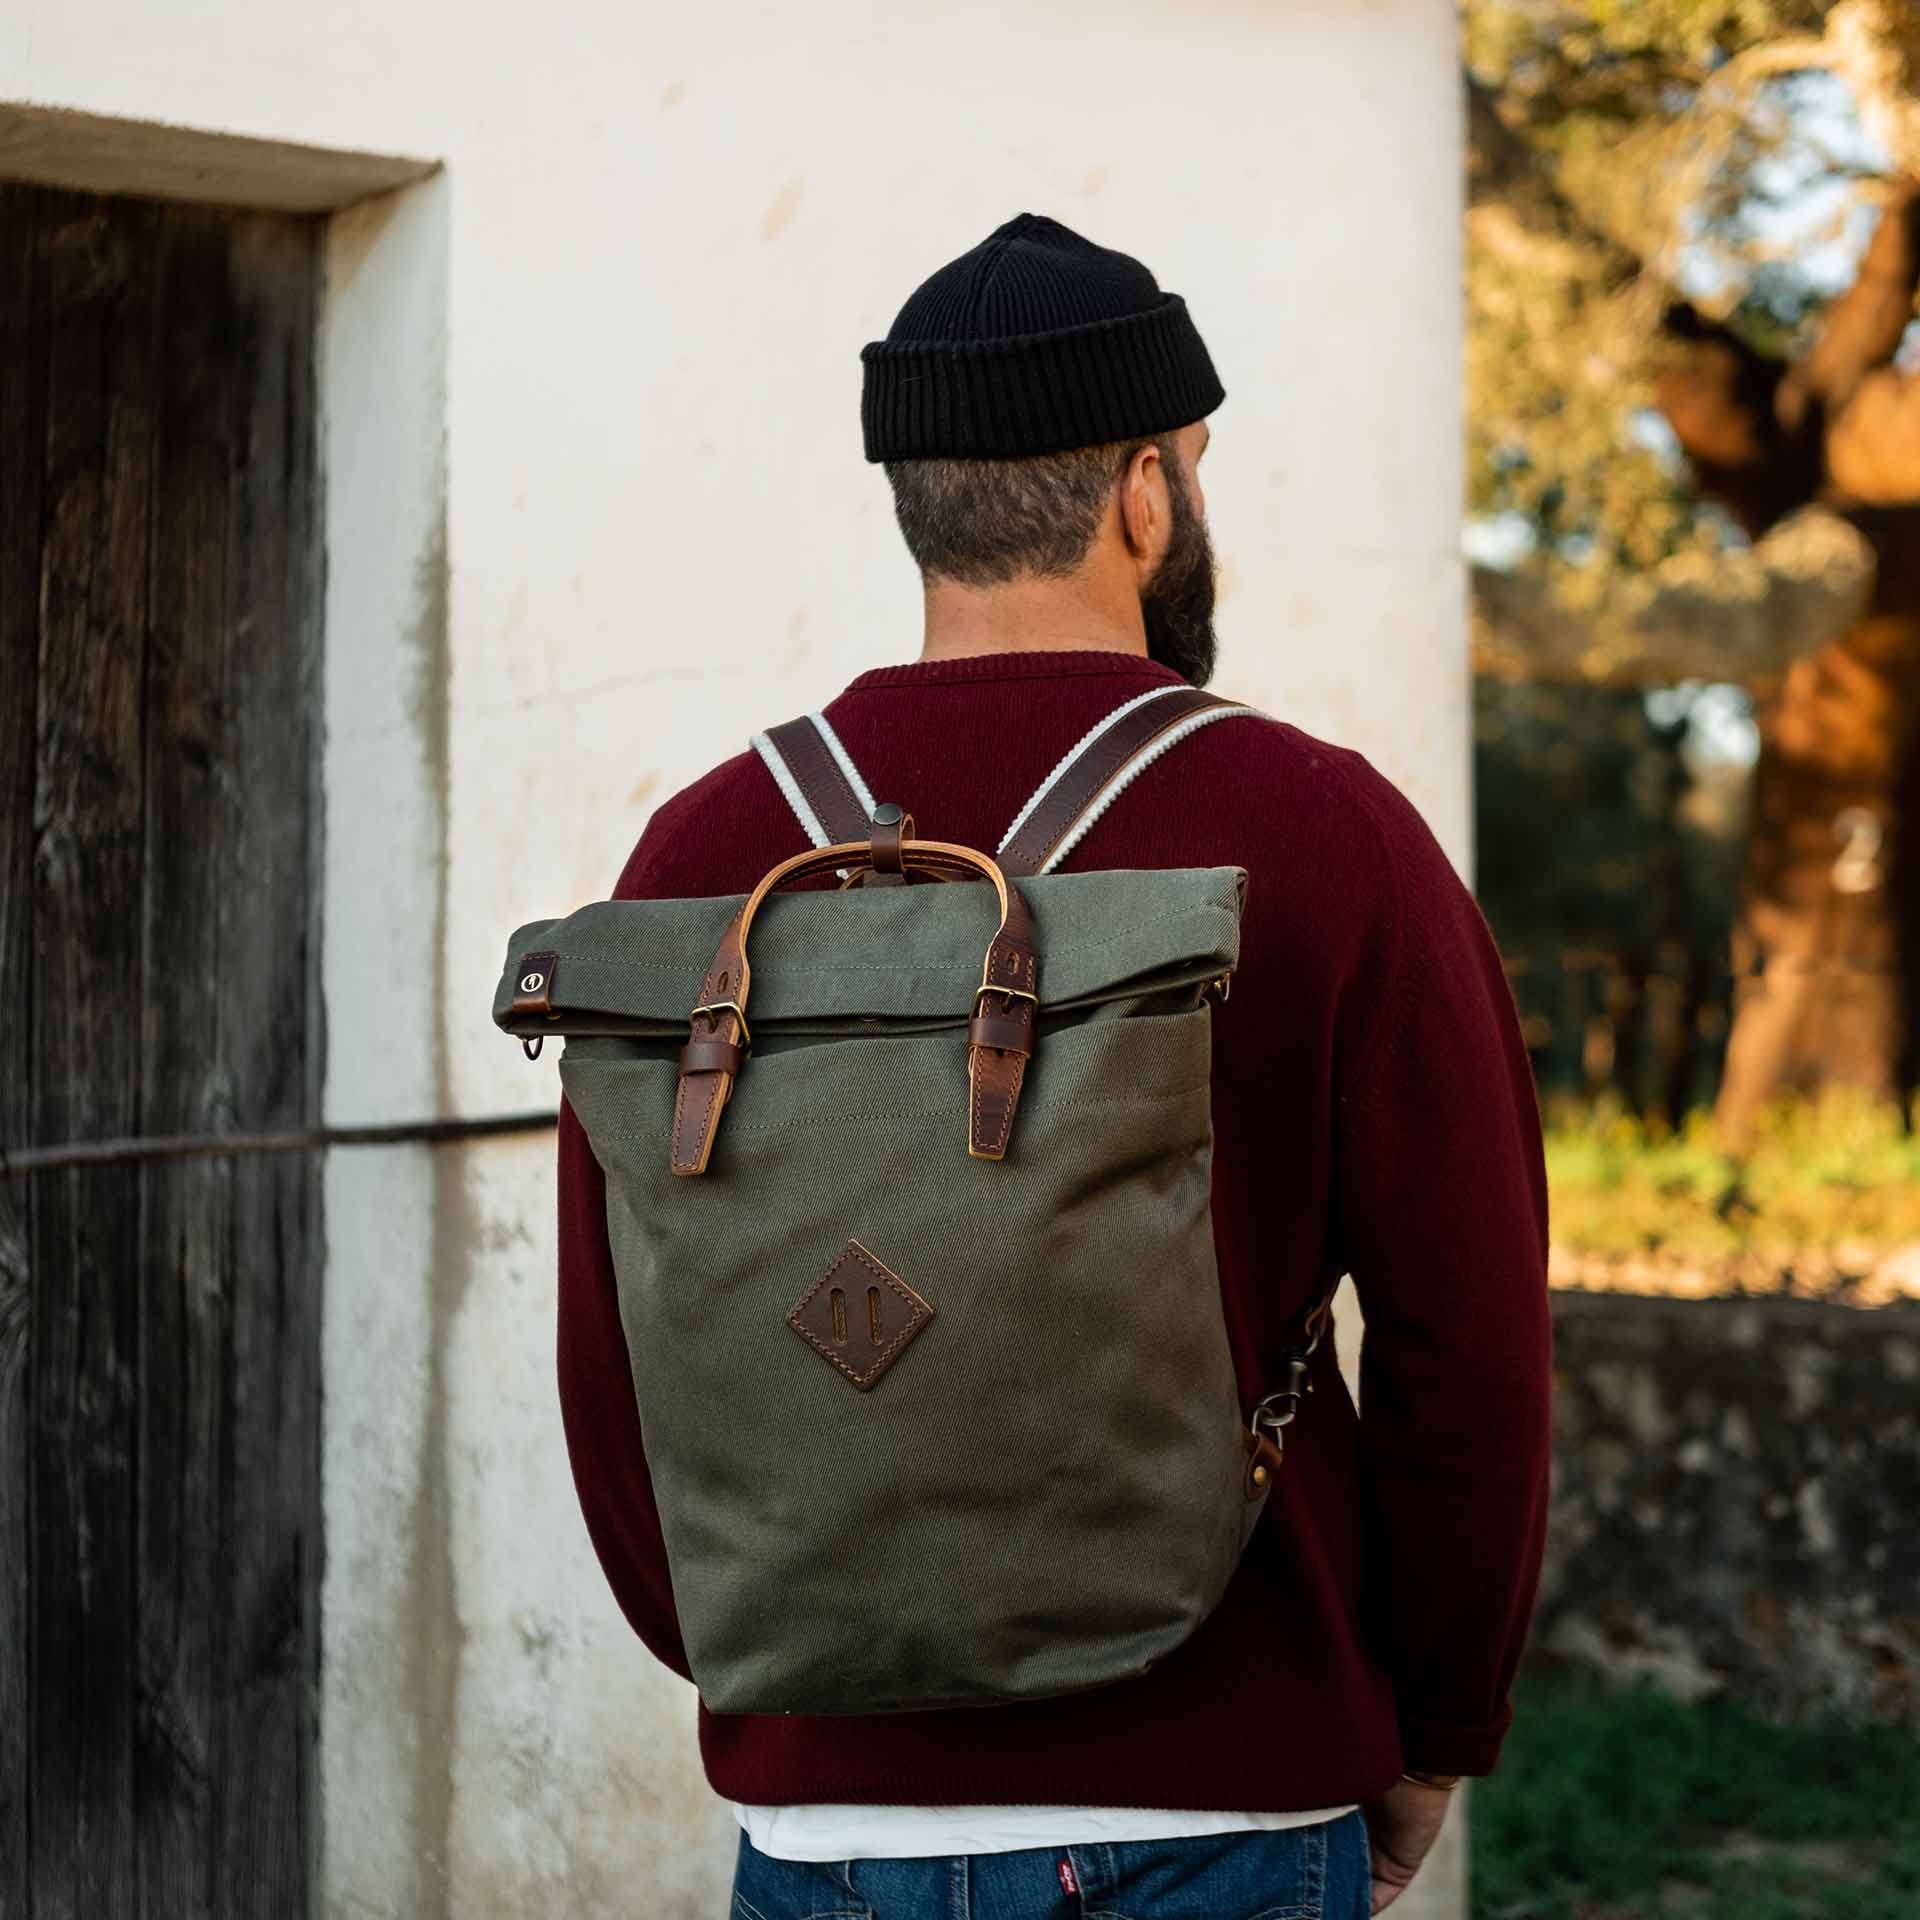 A man carries Woody's backpack on his back outdoors.